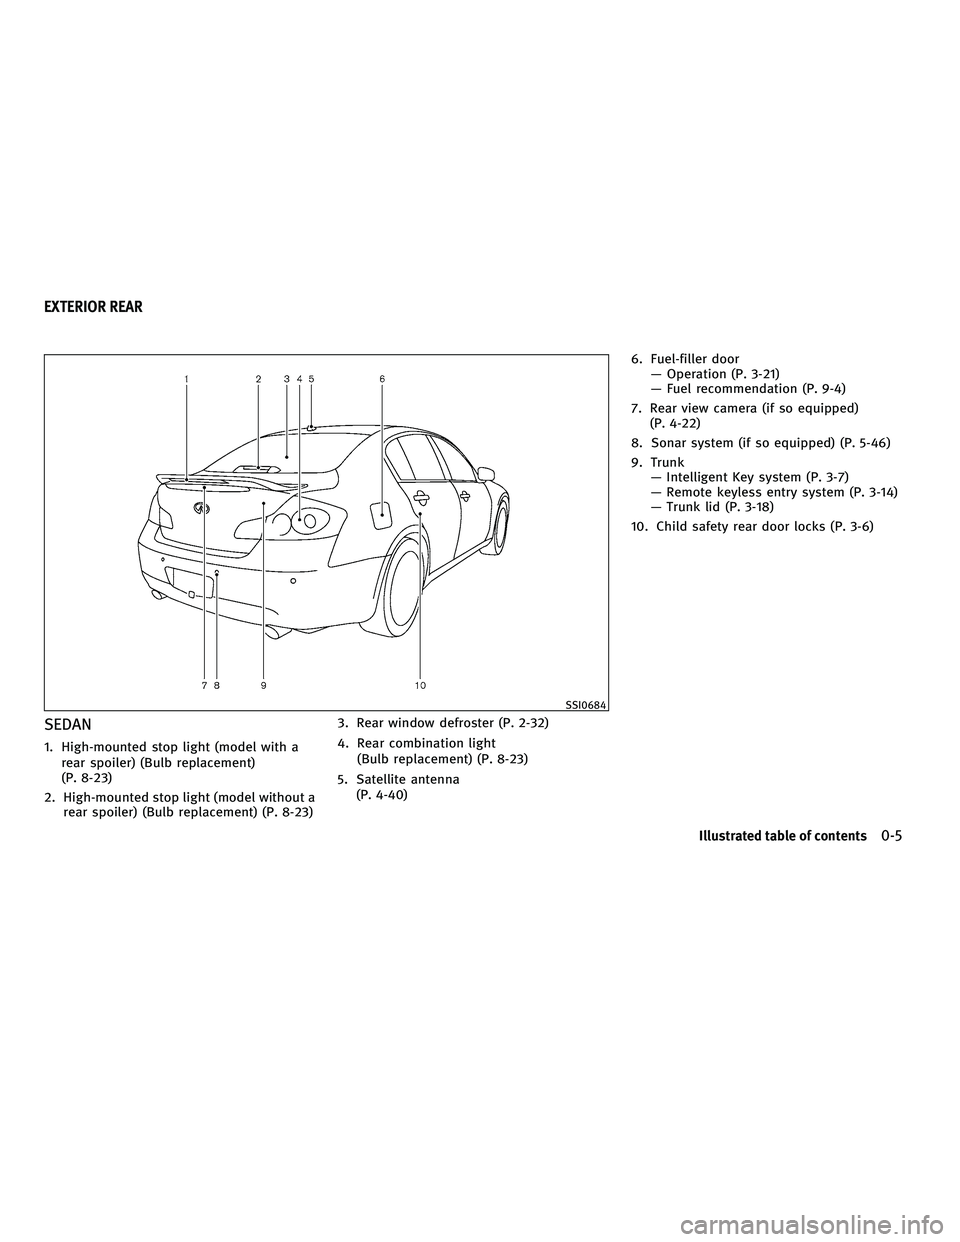 INFINITI G 2010 User Guide SEDAN
1. High-mounted stop light (model with arear spoiler) (Bulb replacement)
(P. 8-23)
2. High-mounted stop light (model without a rear spoiler) (Bulb replacement) (P. 8-23) 3. Rear window defroster